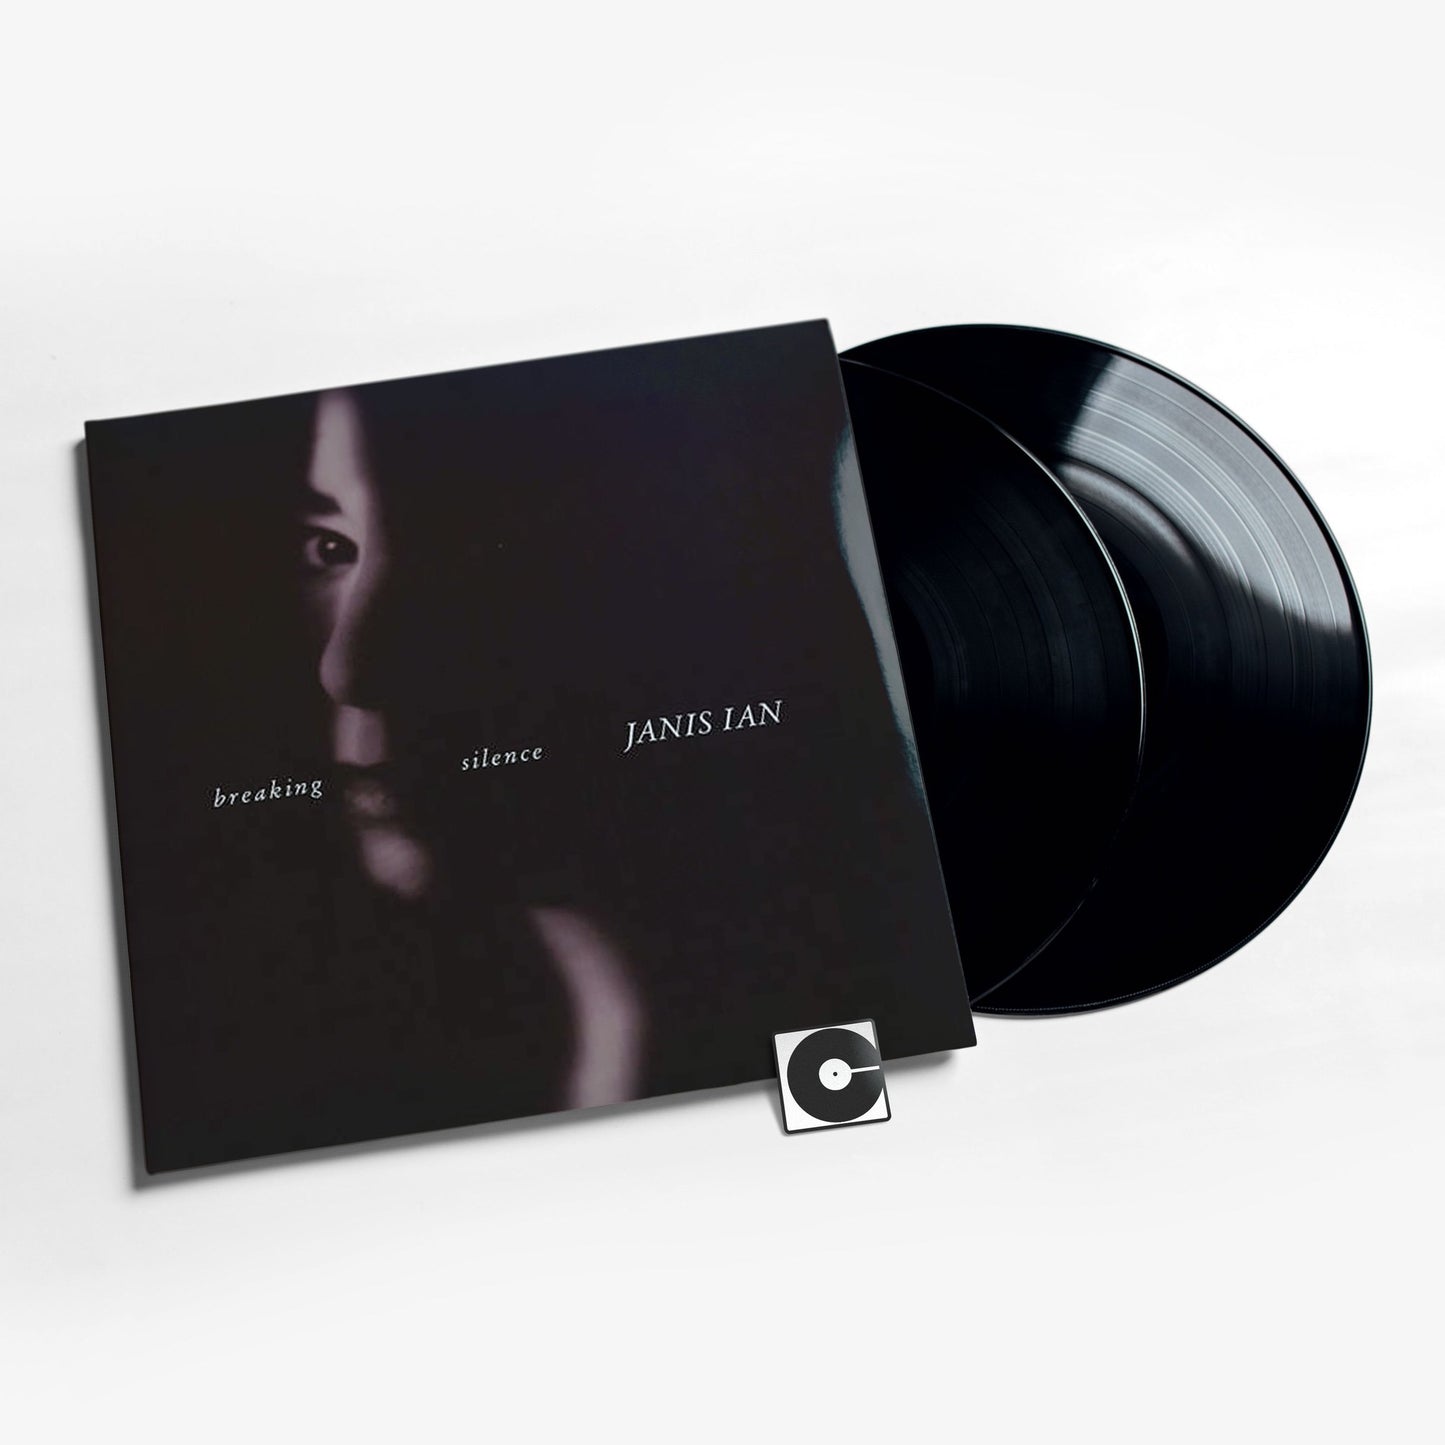 Janis Ian - "Breaking Silence" Analogue Productions